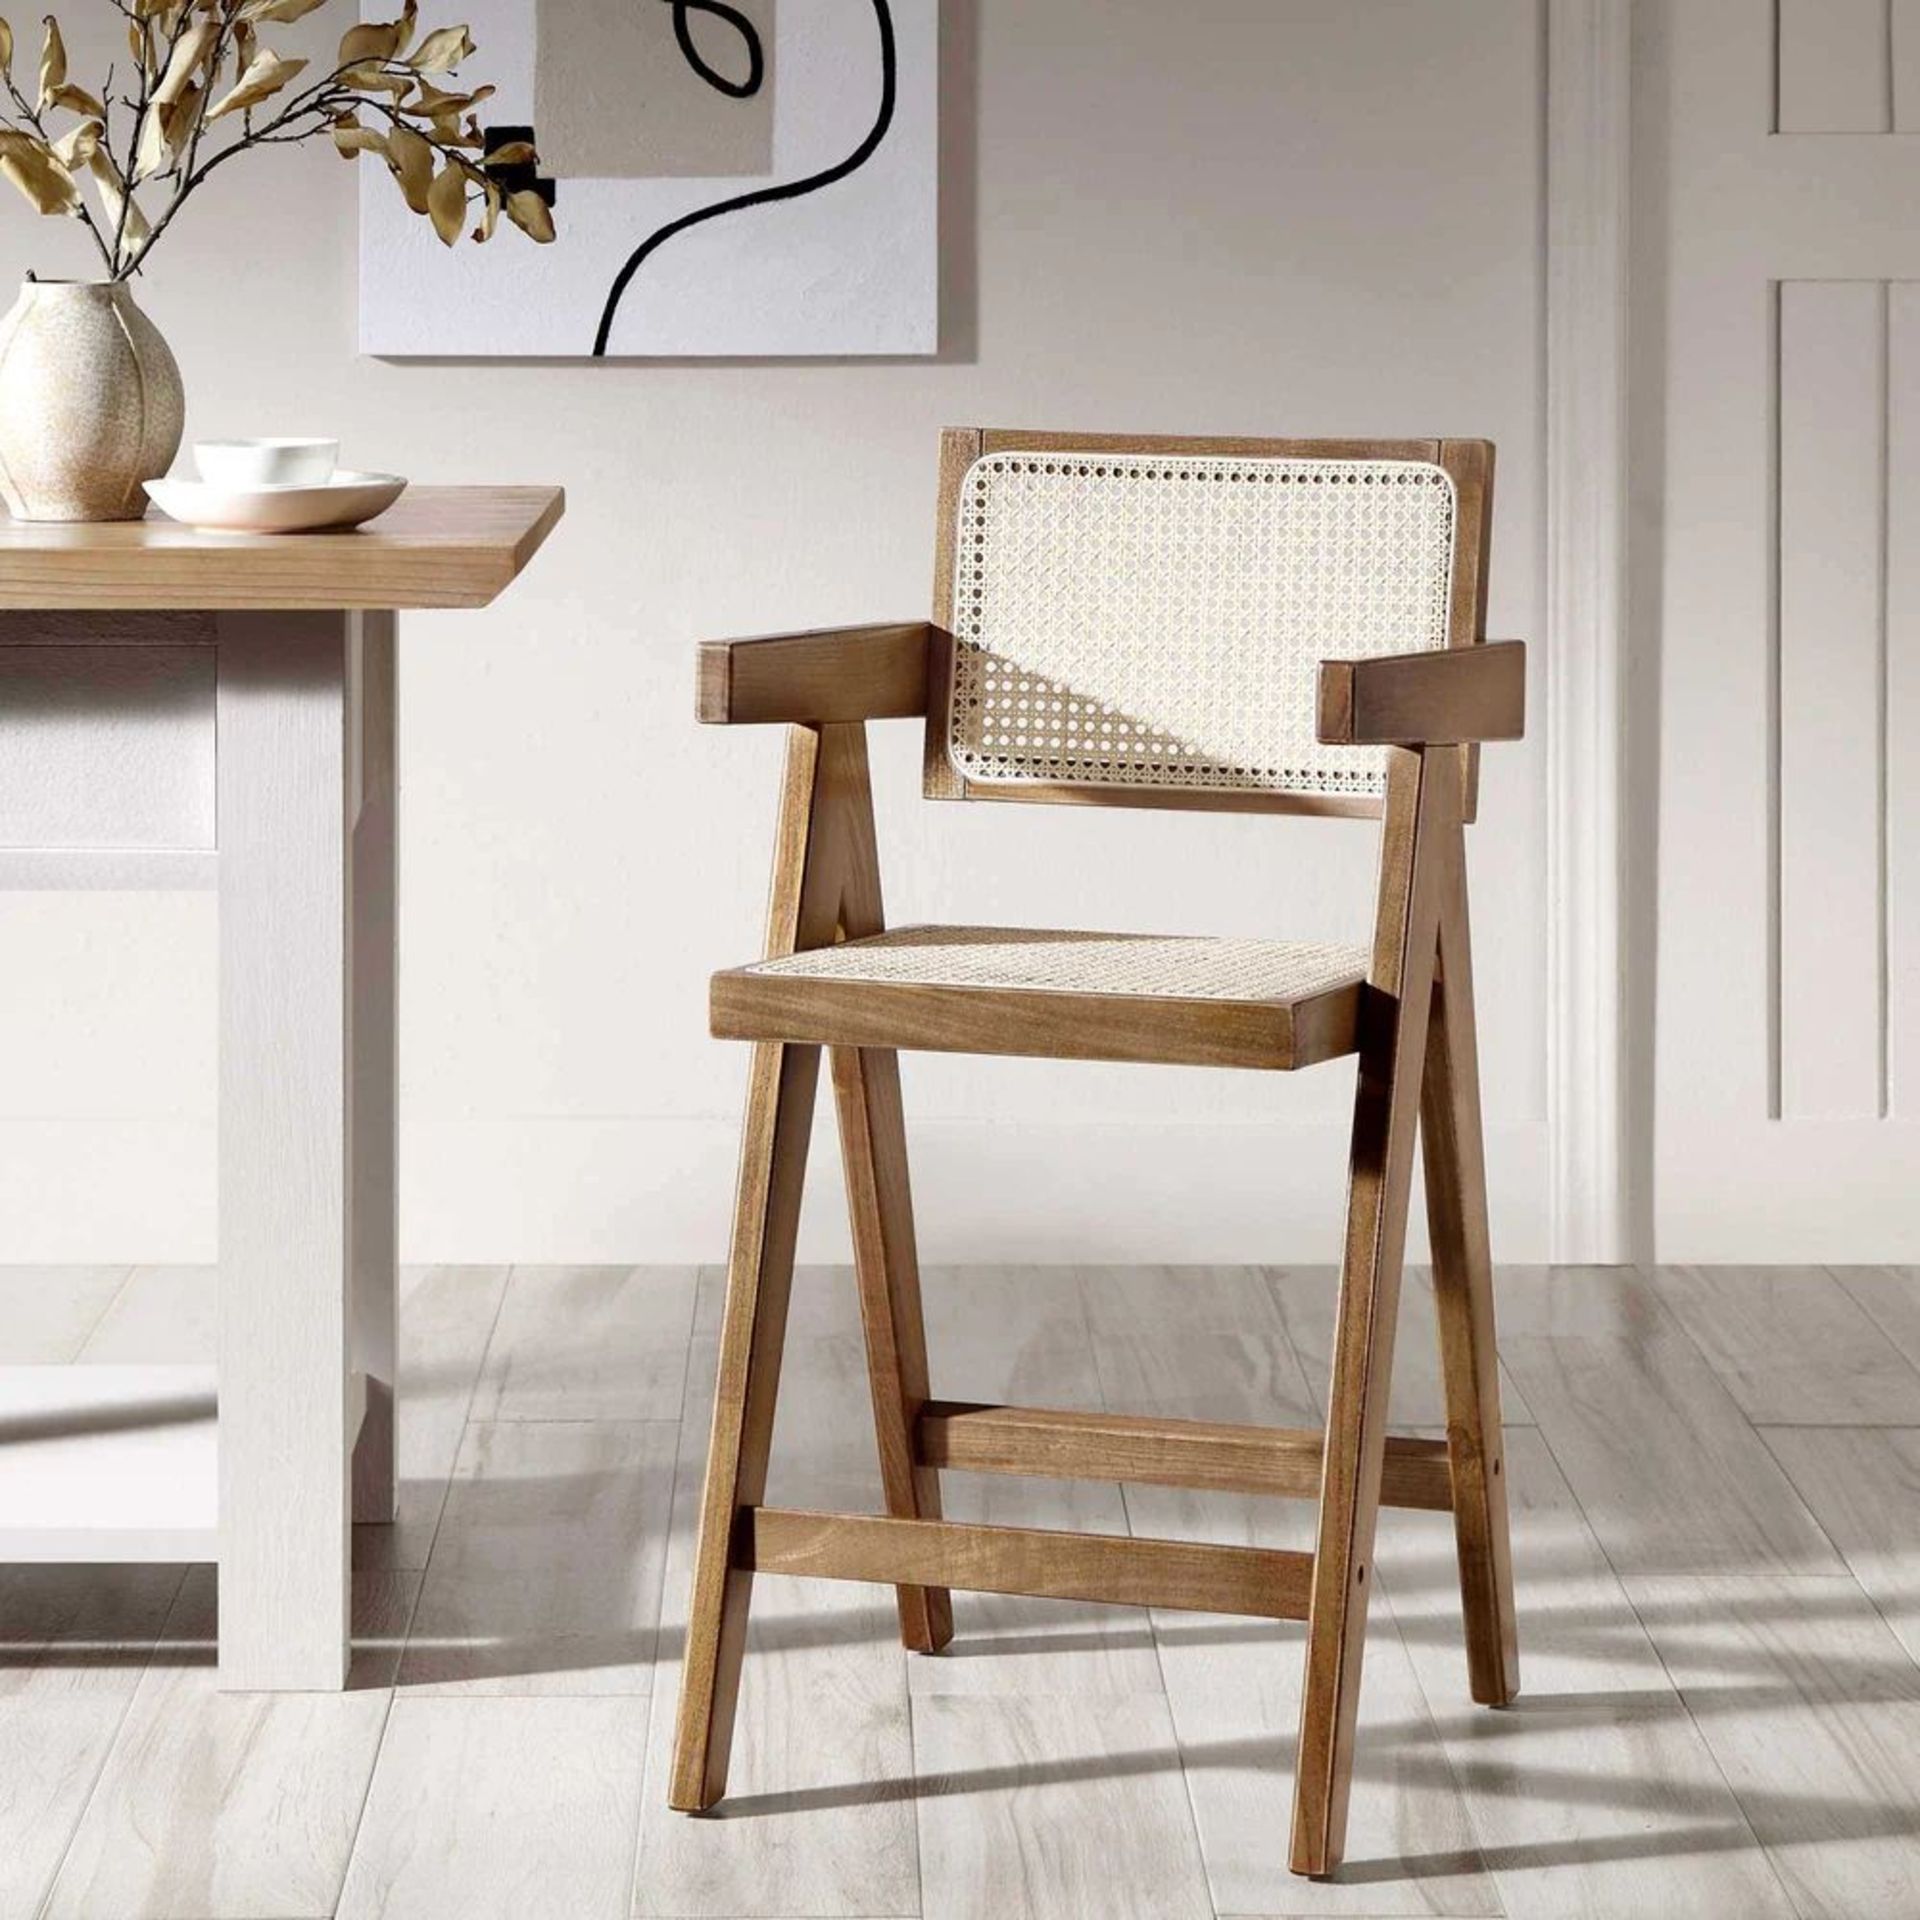 Jeanne Light Walnut Cane Rattan Solid Beech Wood Counter Stool. - ER20. RRP £239.99. The cane rattan